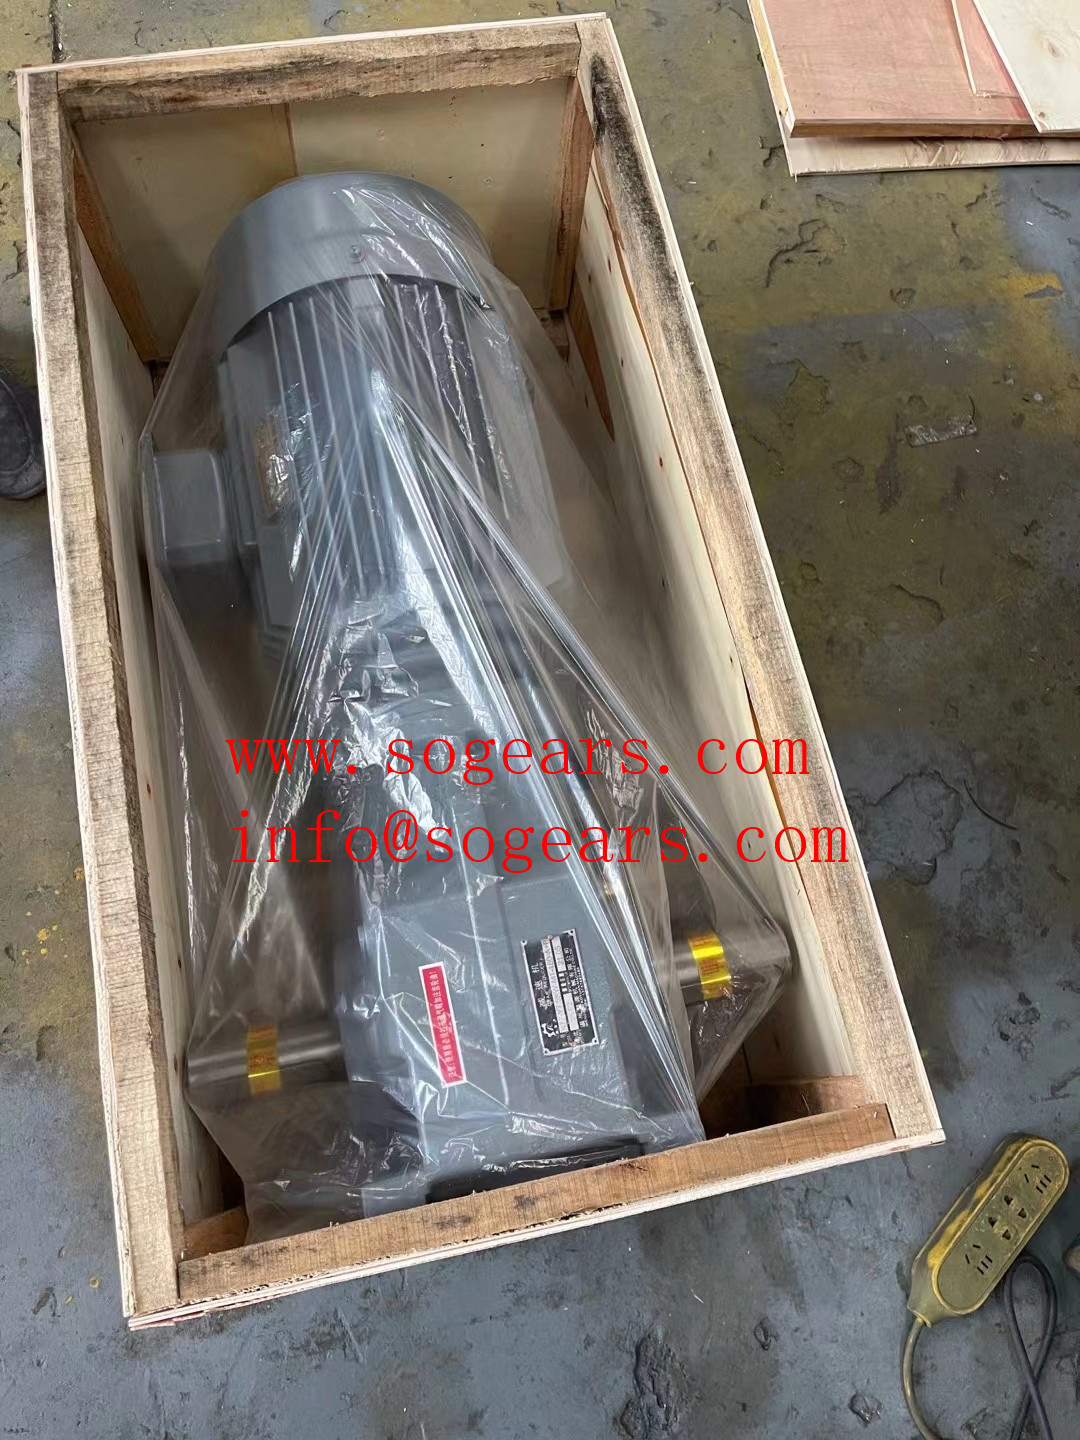 what is the price of chinese 2 hp motor